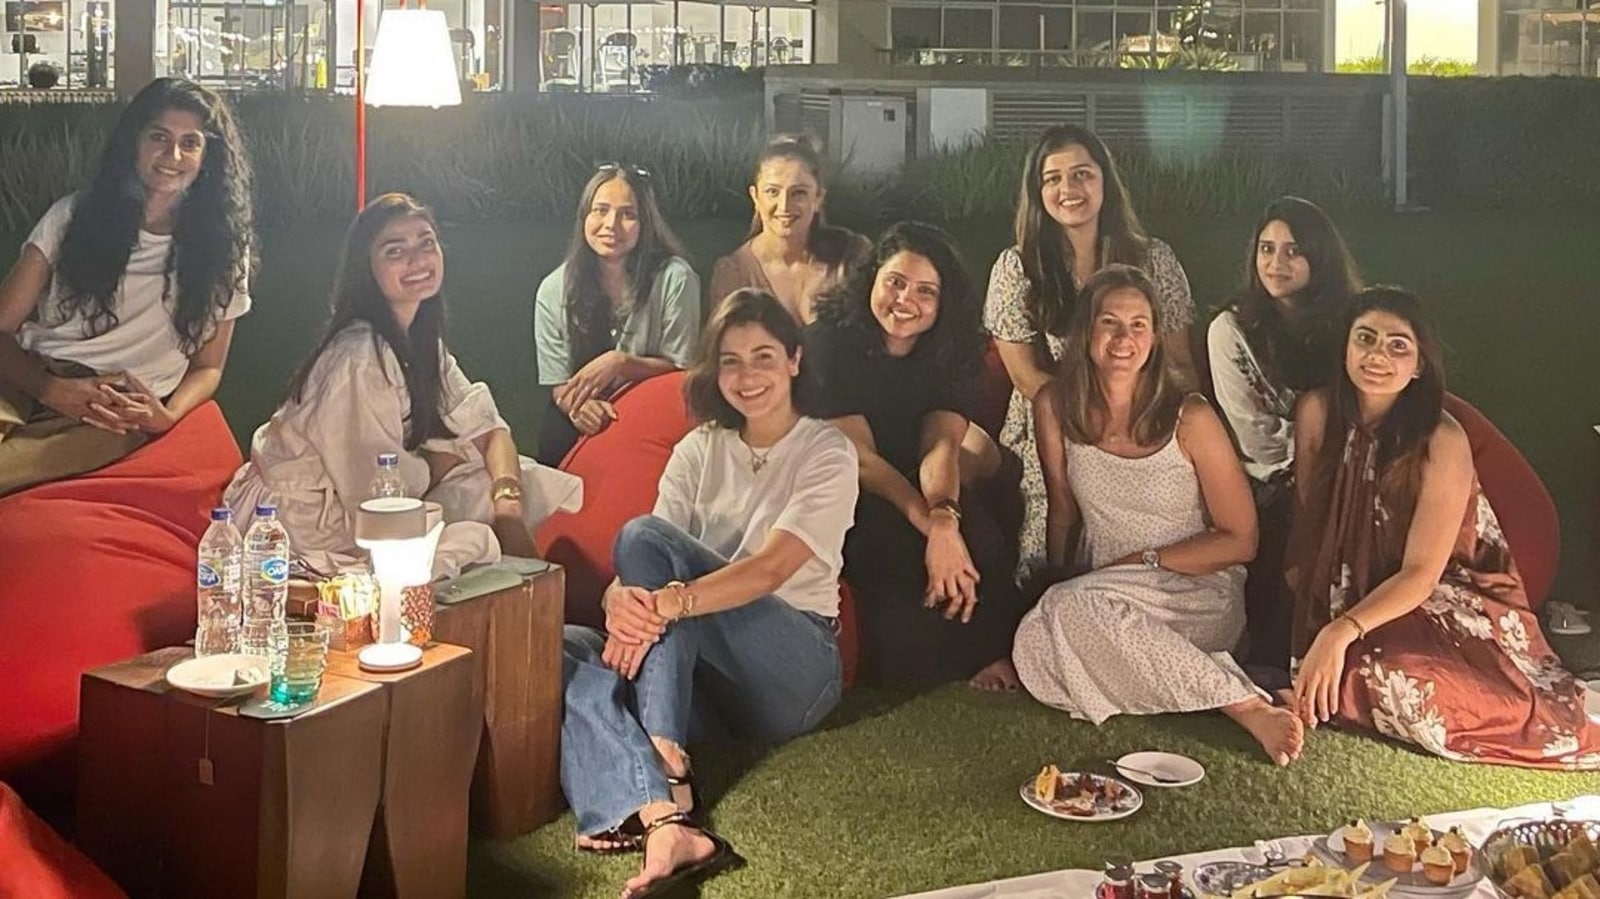 Anushka Sharma, Athiya Shetty join Rohit Sharmas wife Ritika and others for a tea party in throwback pics Bollywood image pic